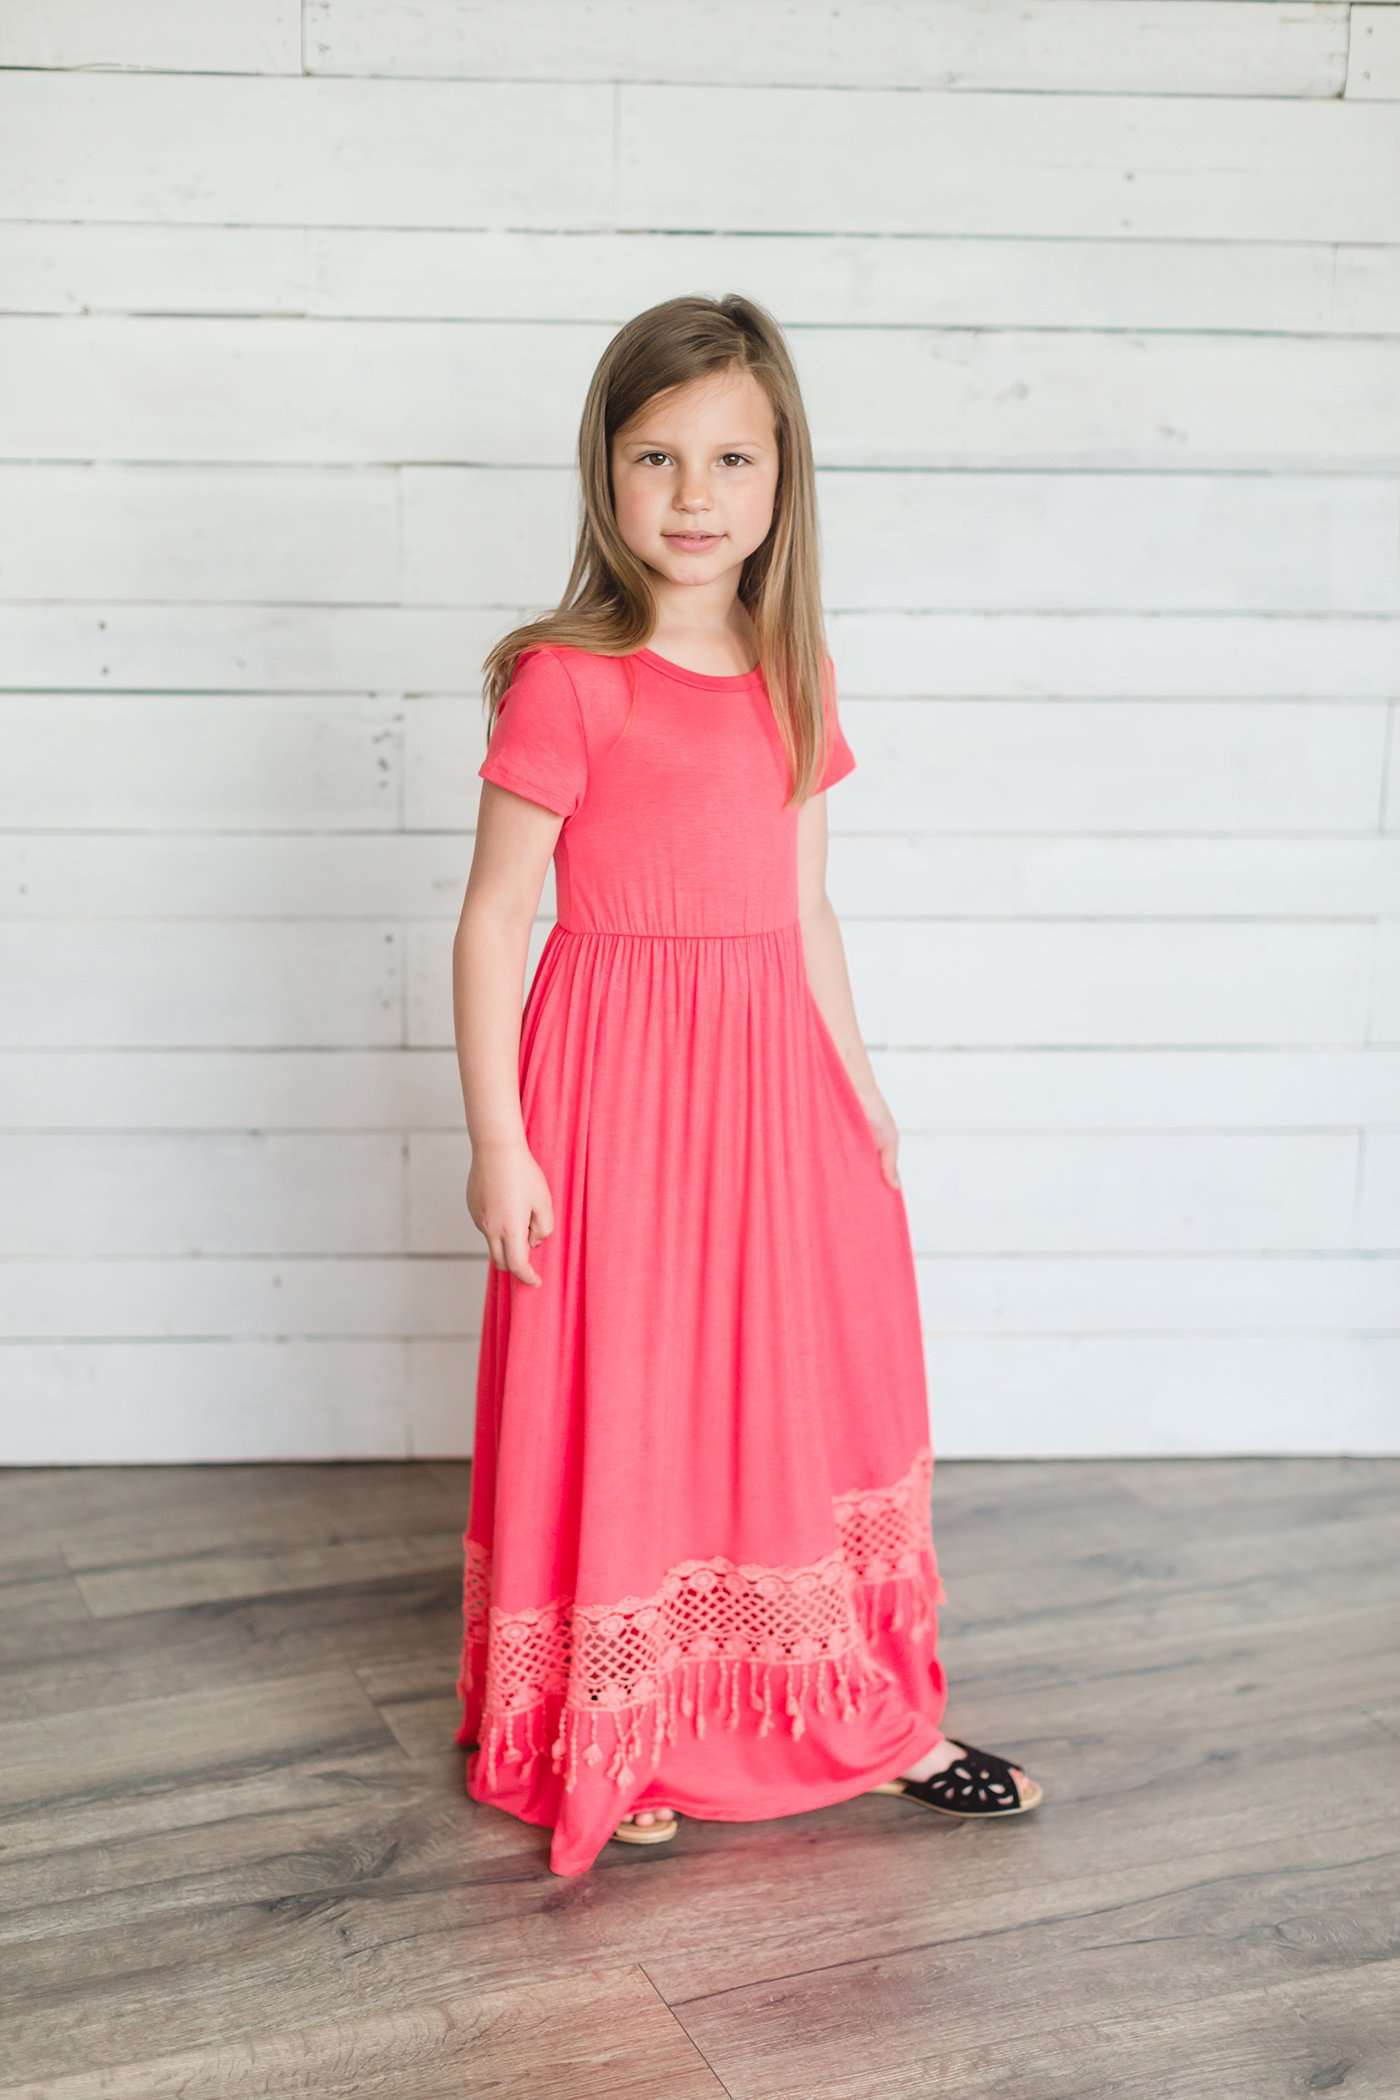 coral or mint colored short sleeve girls maxi dress with crochet detail at the bottom and elastic waist.